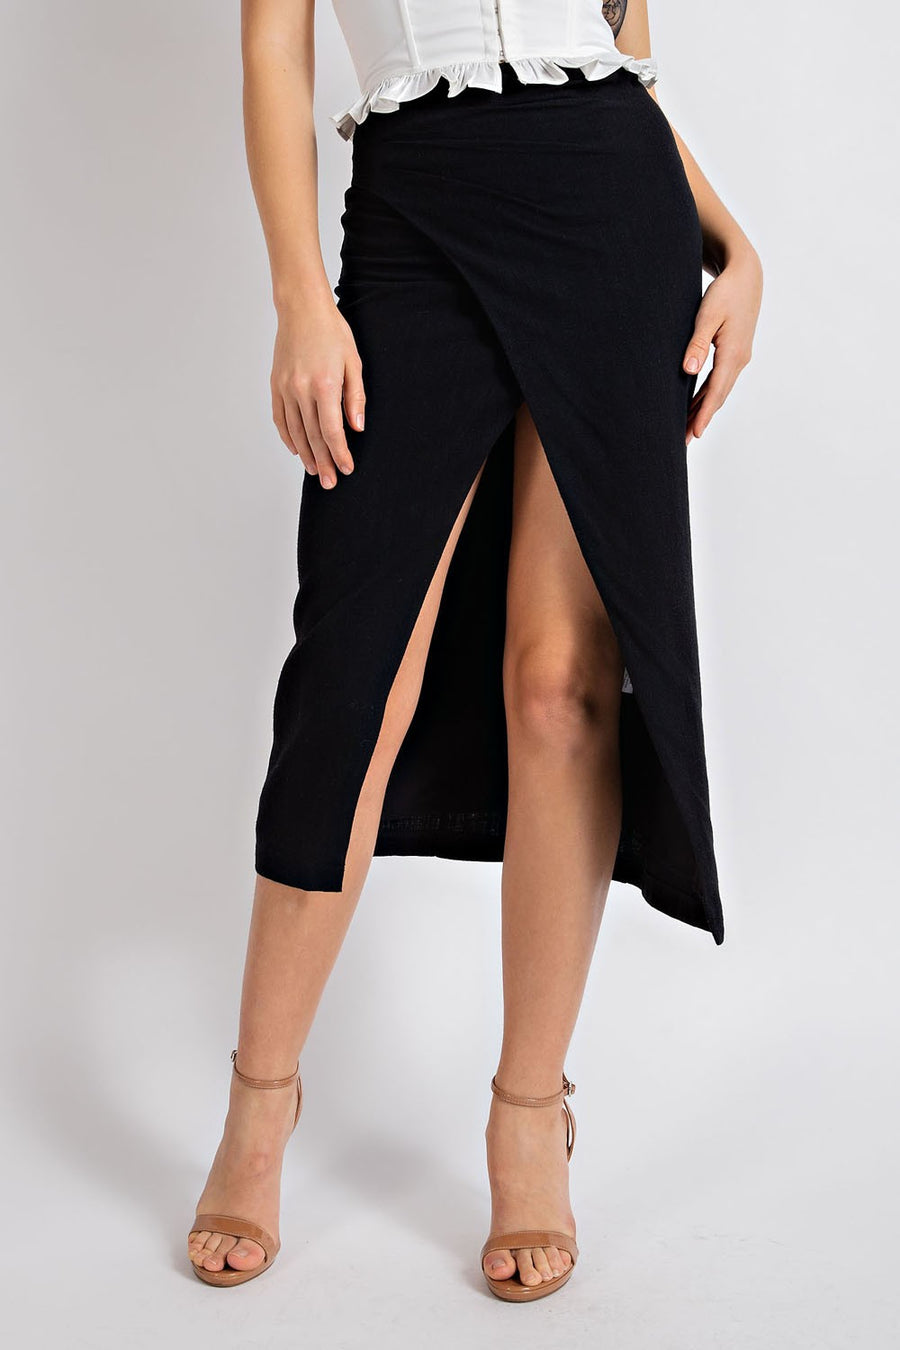 Model is wearing a black linen midi skirt with front slit.